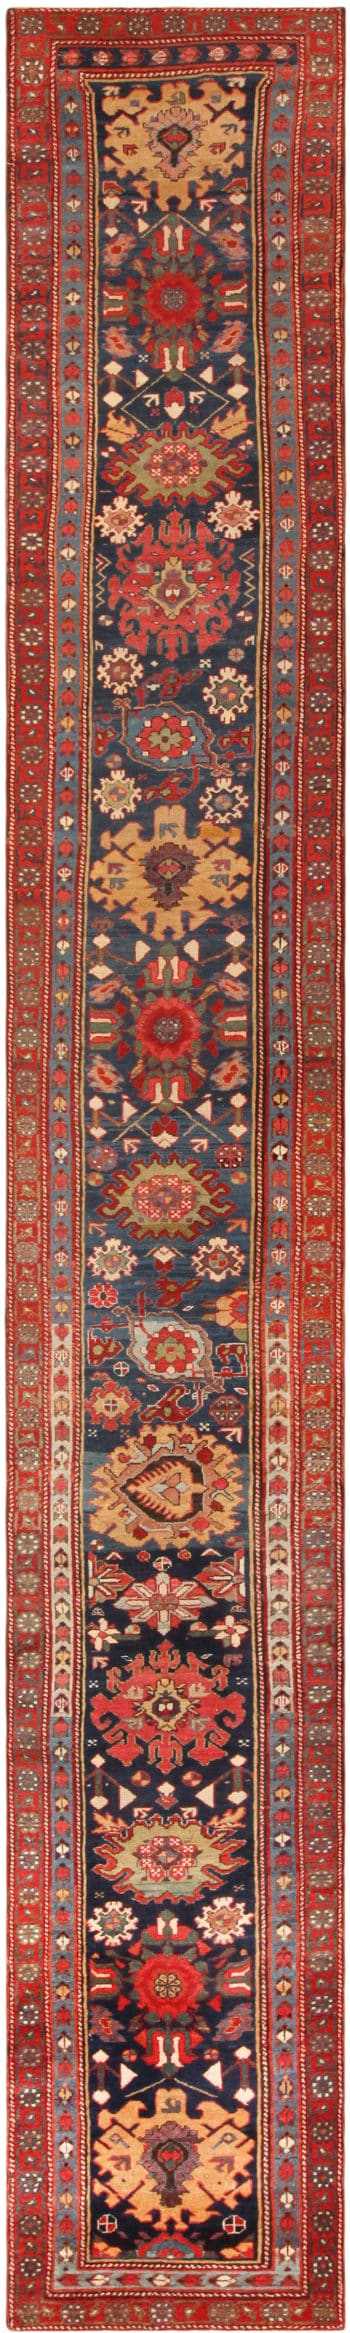 Antique North West Persian Runner Rug 72107 by Nazmiyal Antique Rugs